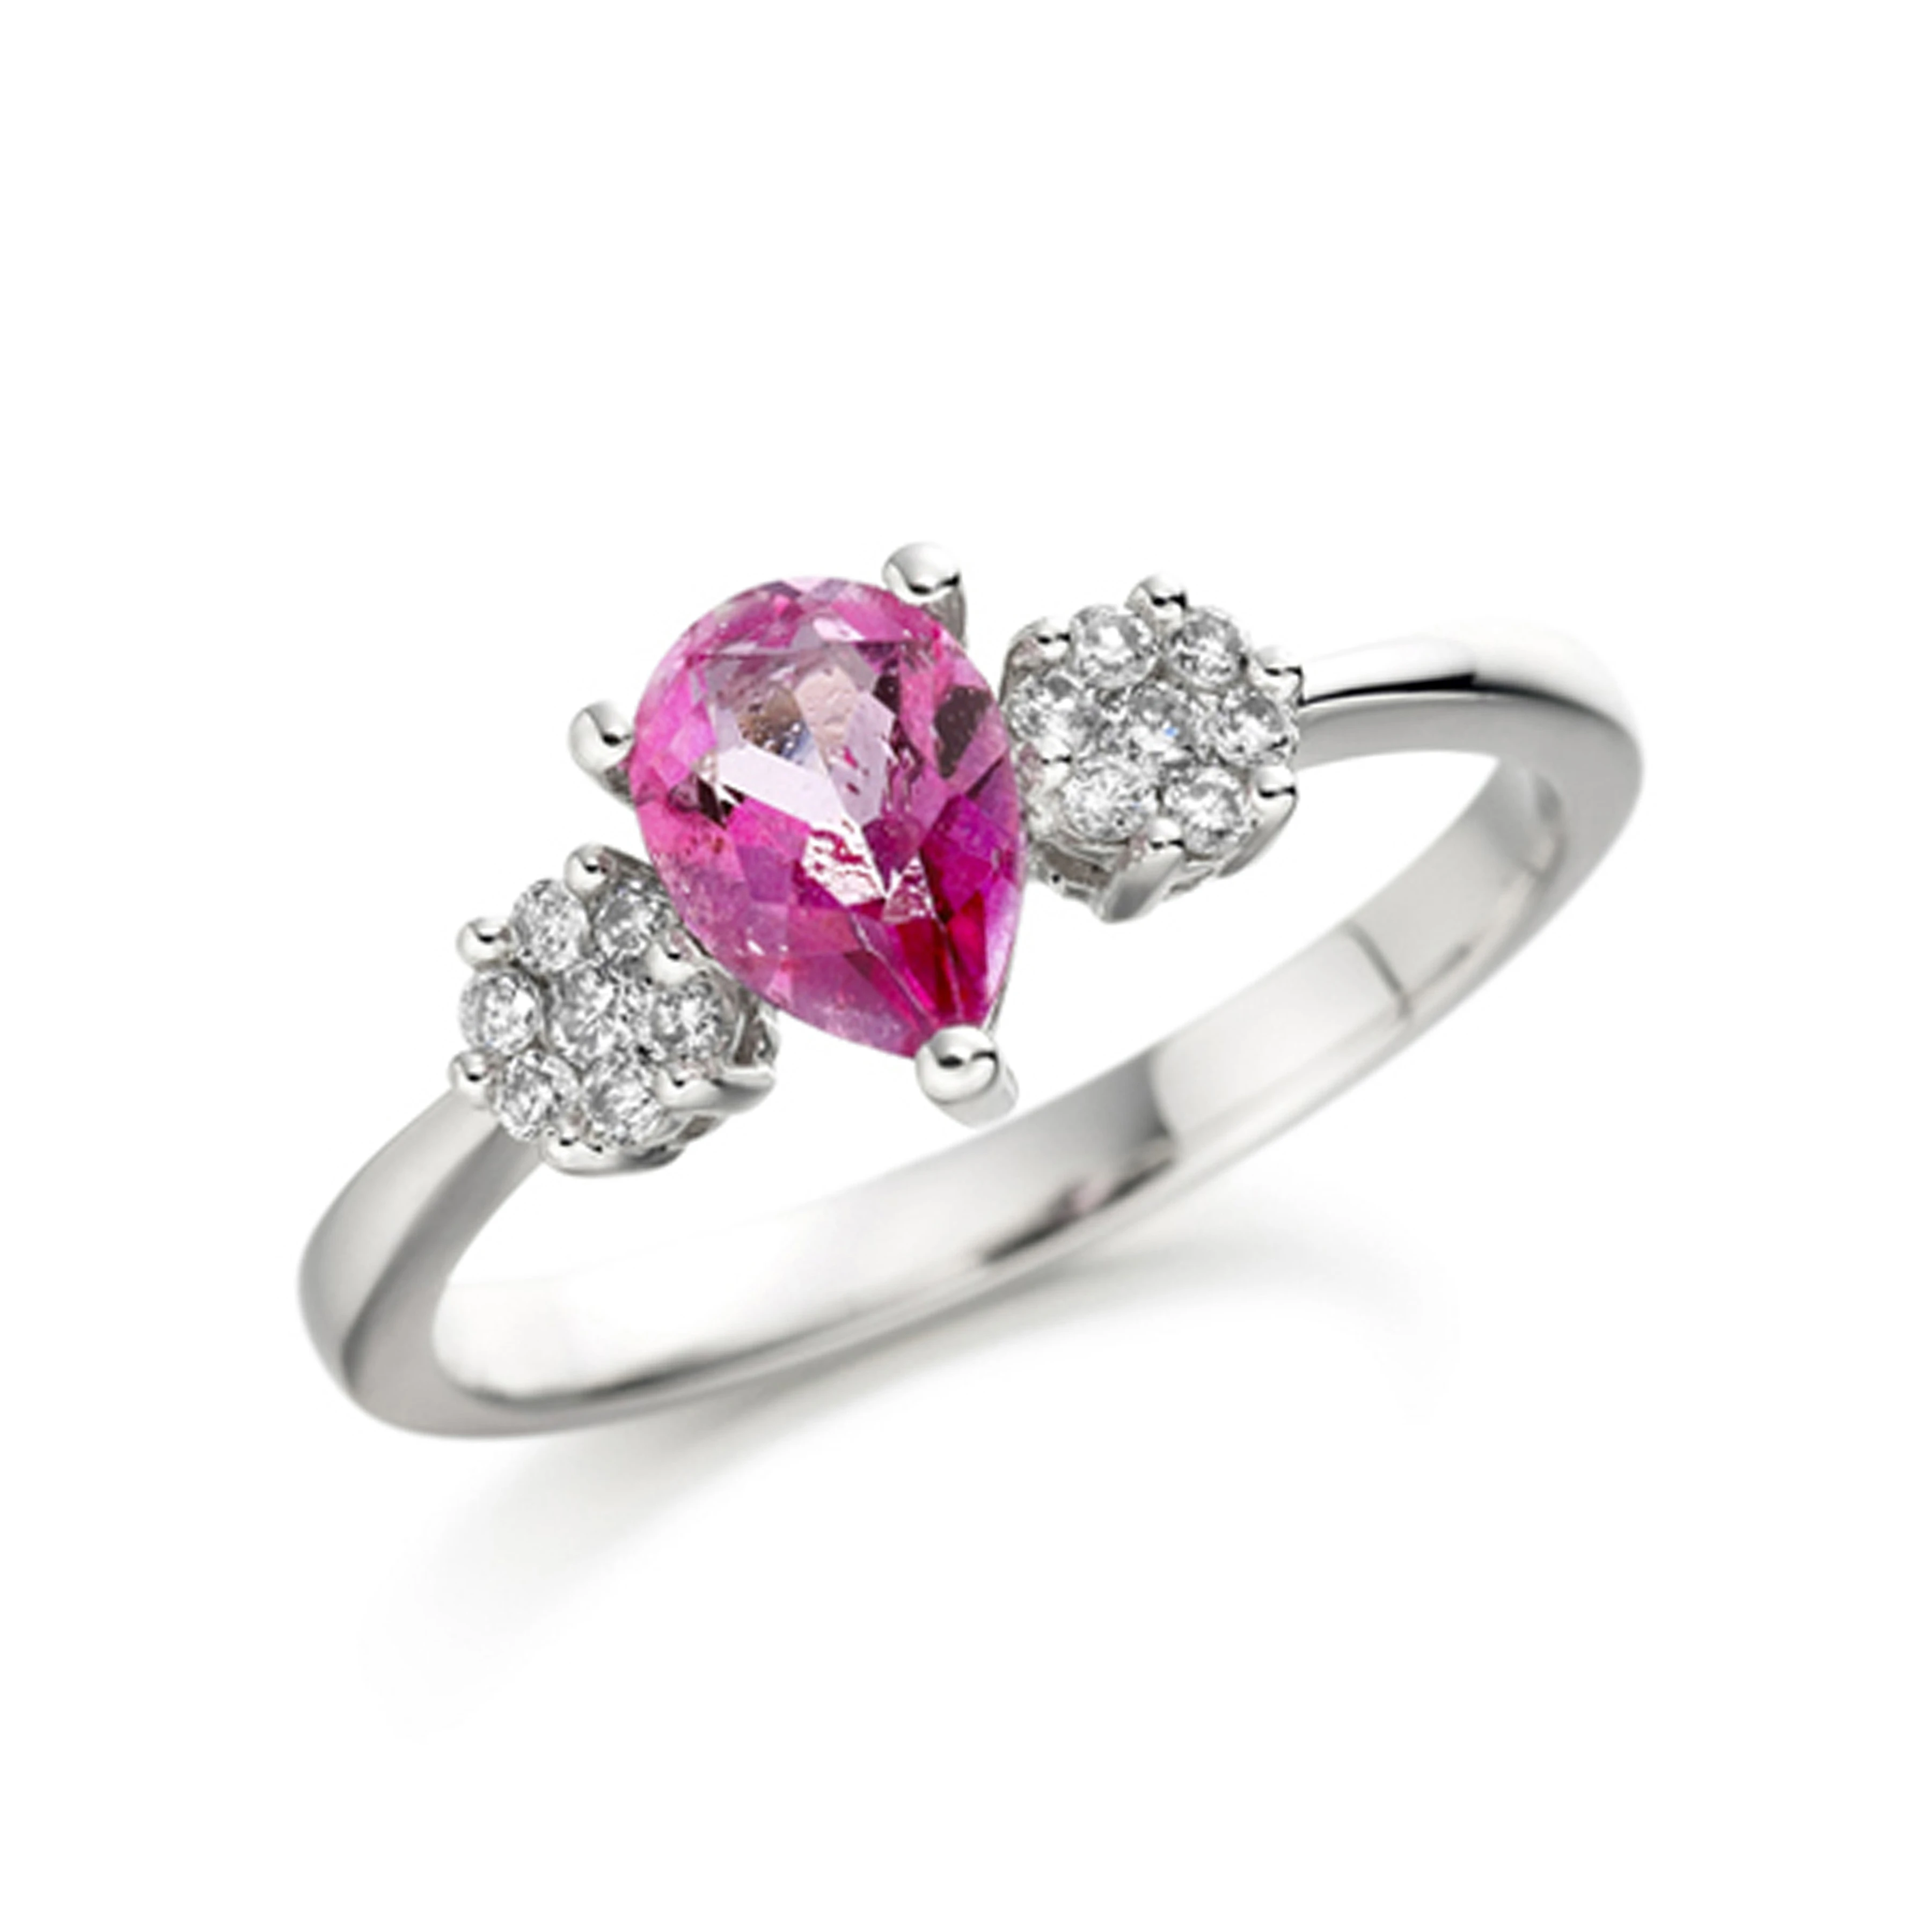 6X4mm Pear Pink Topaz Stones On Shoulder Diamond And Gemstone Engagement Ring